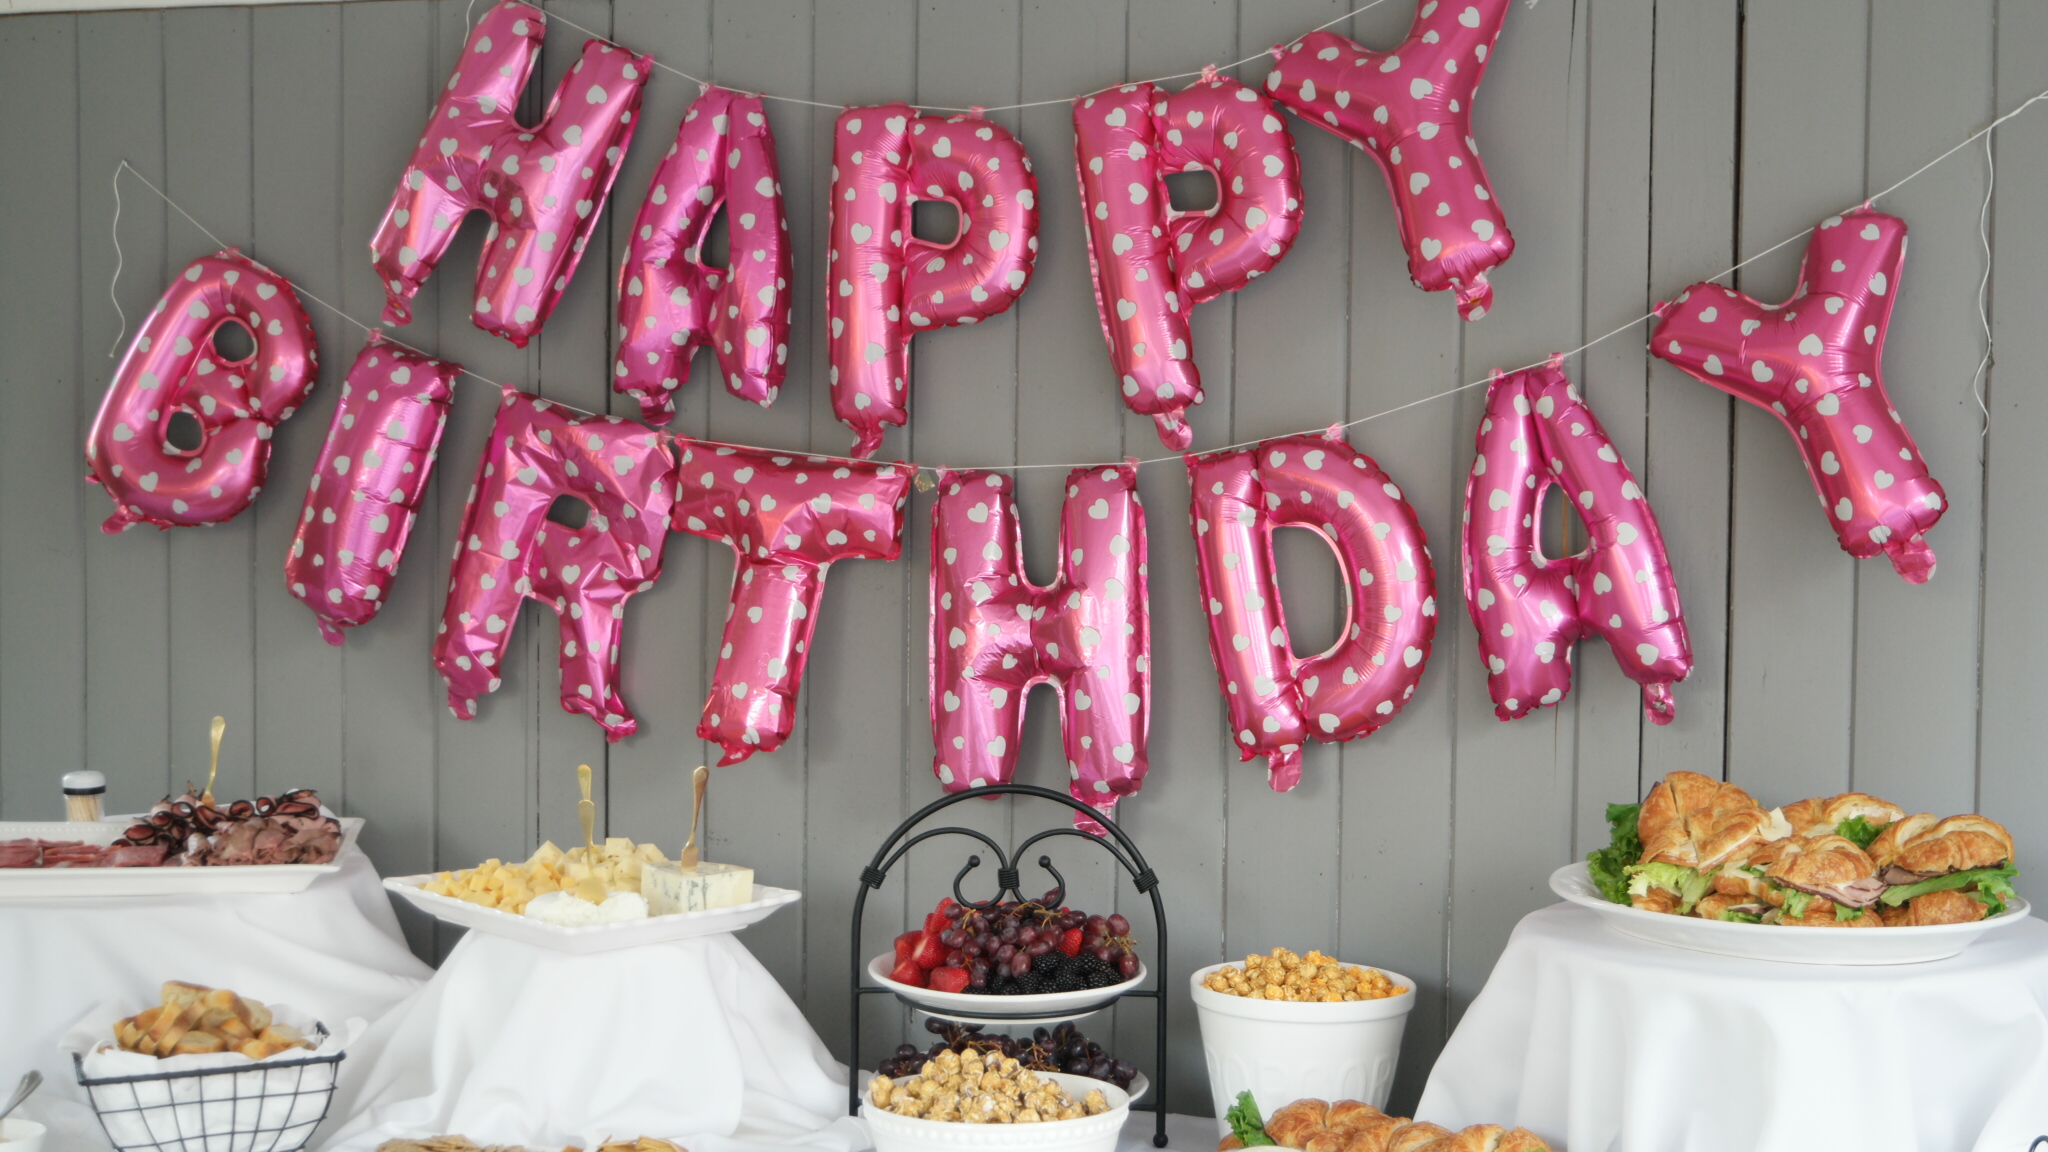 Party Food...and more adorable mylar balloons